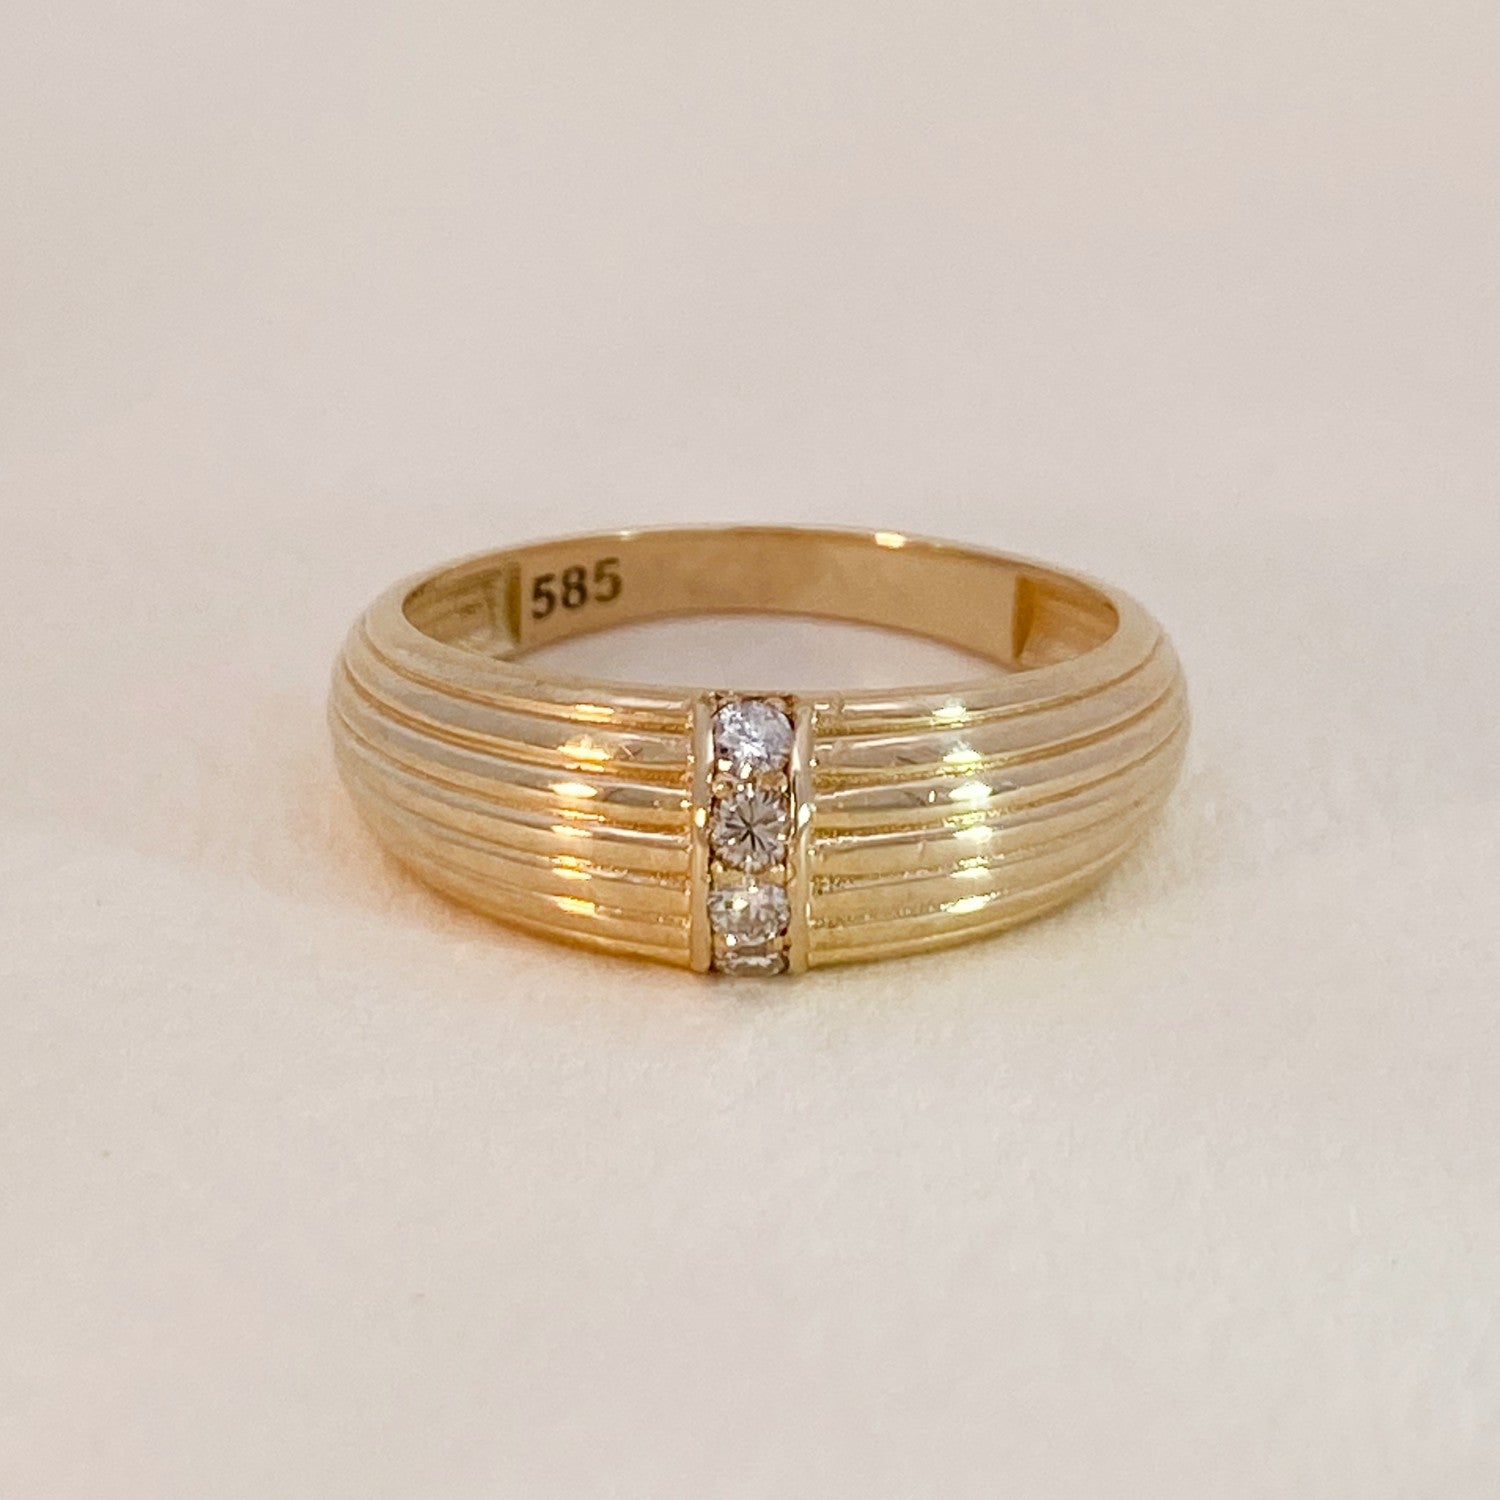 Vintage Ring with Structure and Diamonds